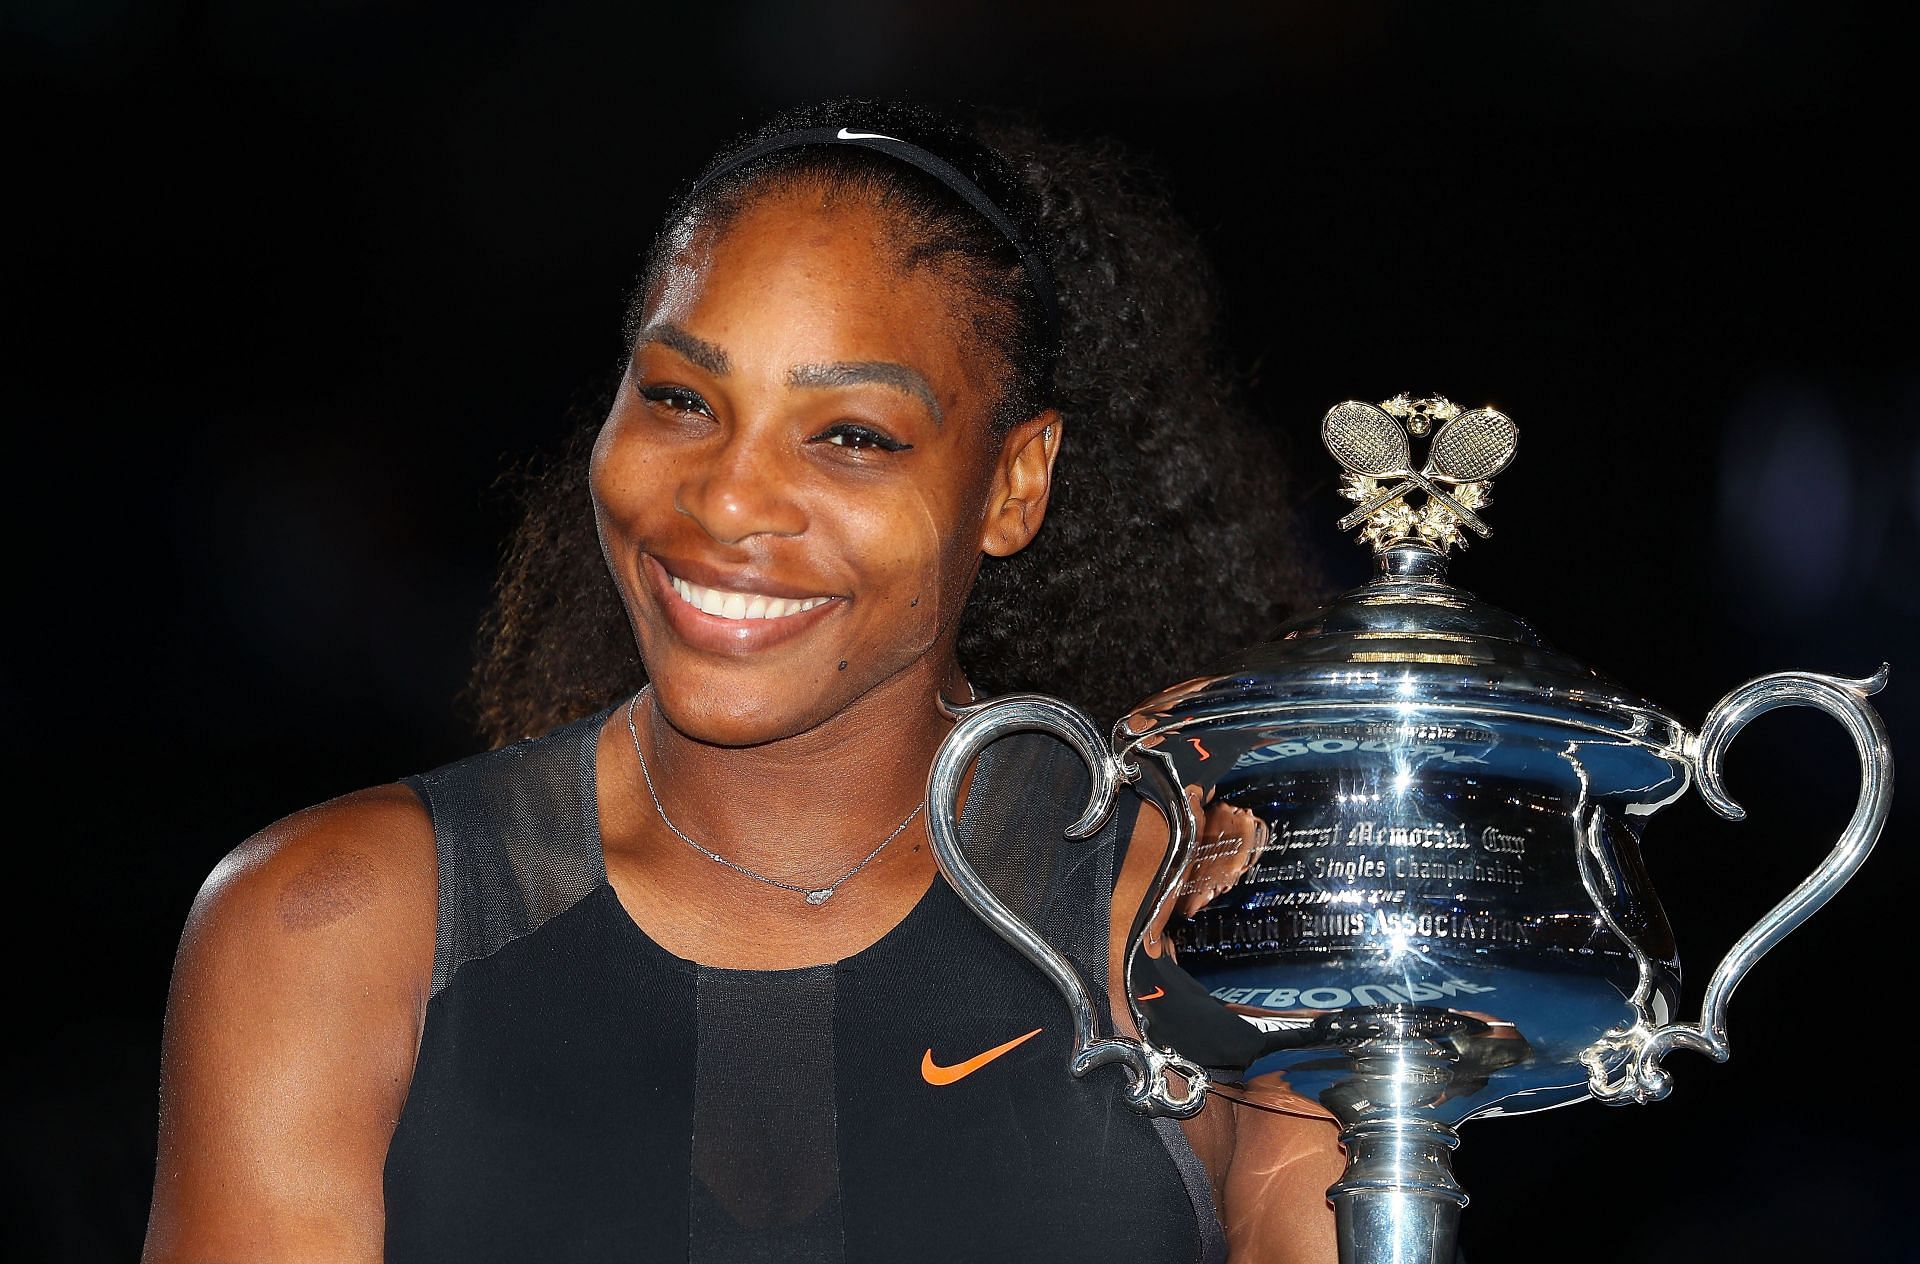 Since winning the Australian Open in 2017, Serena Williams has not added to her tally of 23 Grand Slams